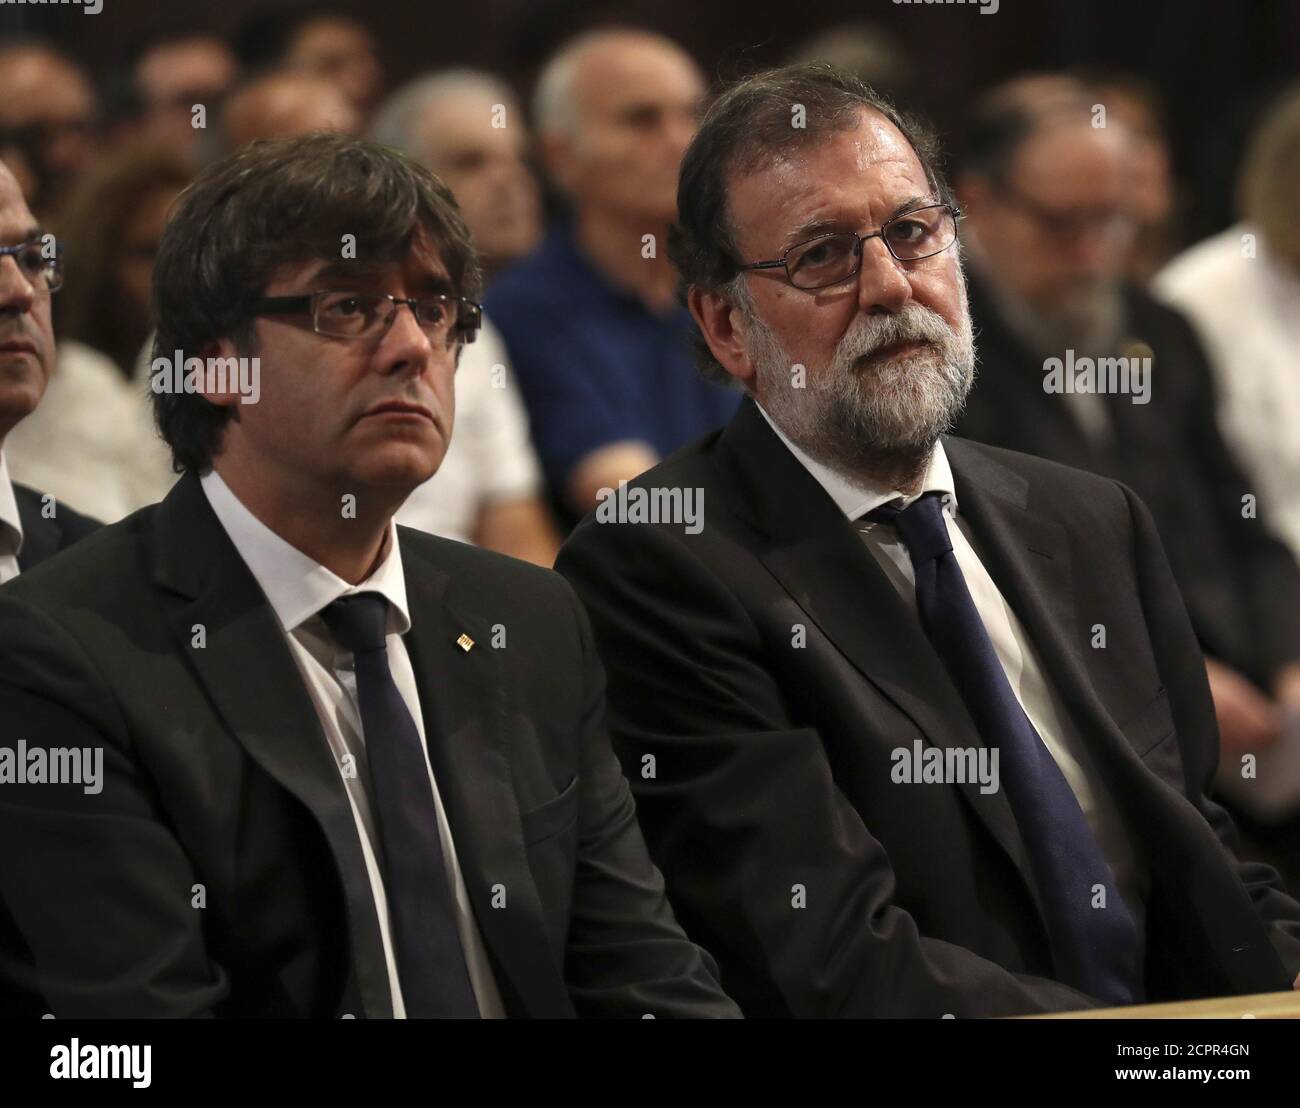 President of the Generalitat of Catalonia Carles Puigdemont and Spanish Prime Minister Mariano Rajoy are seen at a High mass celebrated in memory of the victims of the van attack at Las Ramblas earlier this week, at the Basilica of the Sagrada Familia in Barcelona, Spain August 20, 2017. REUTERS/Sergio Barrenechea/Pool Stock Photo